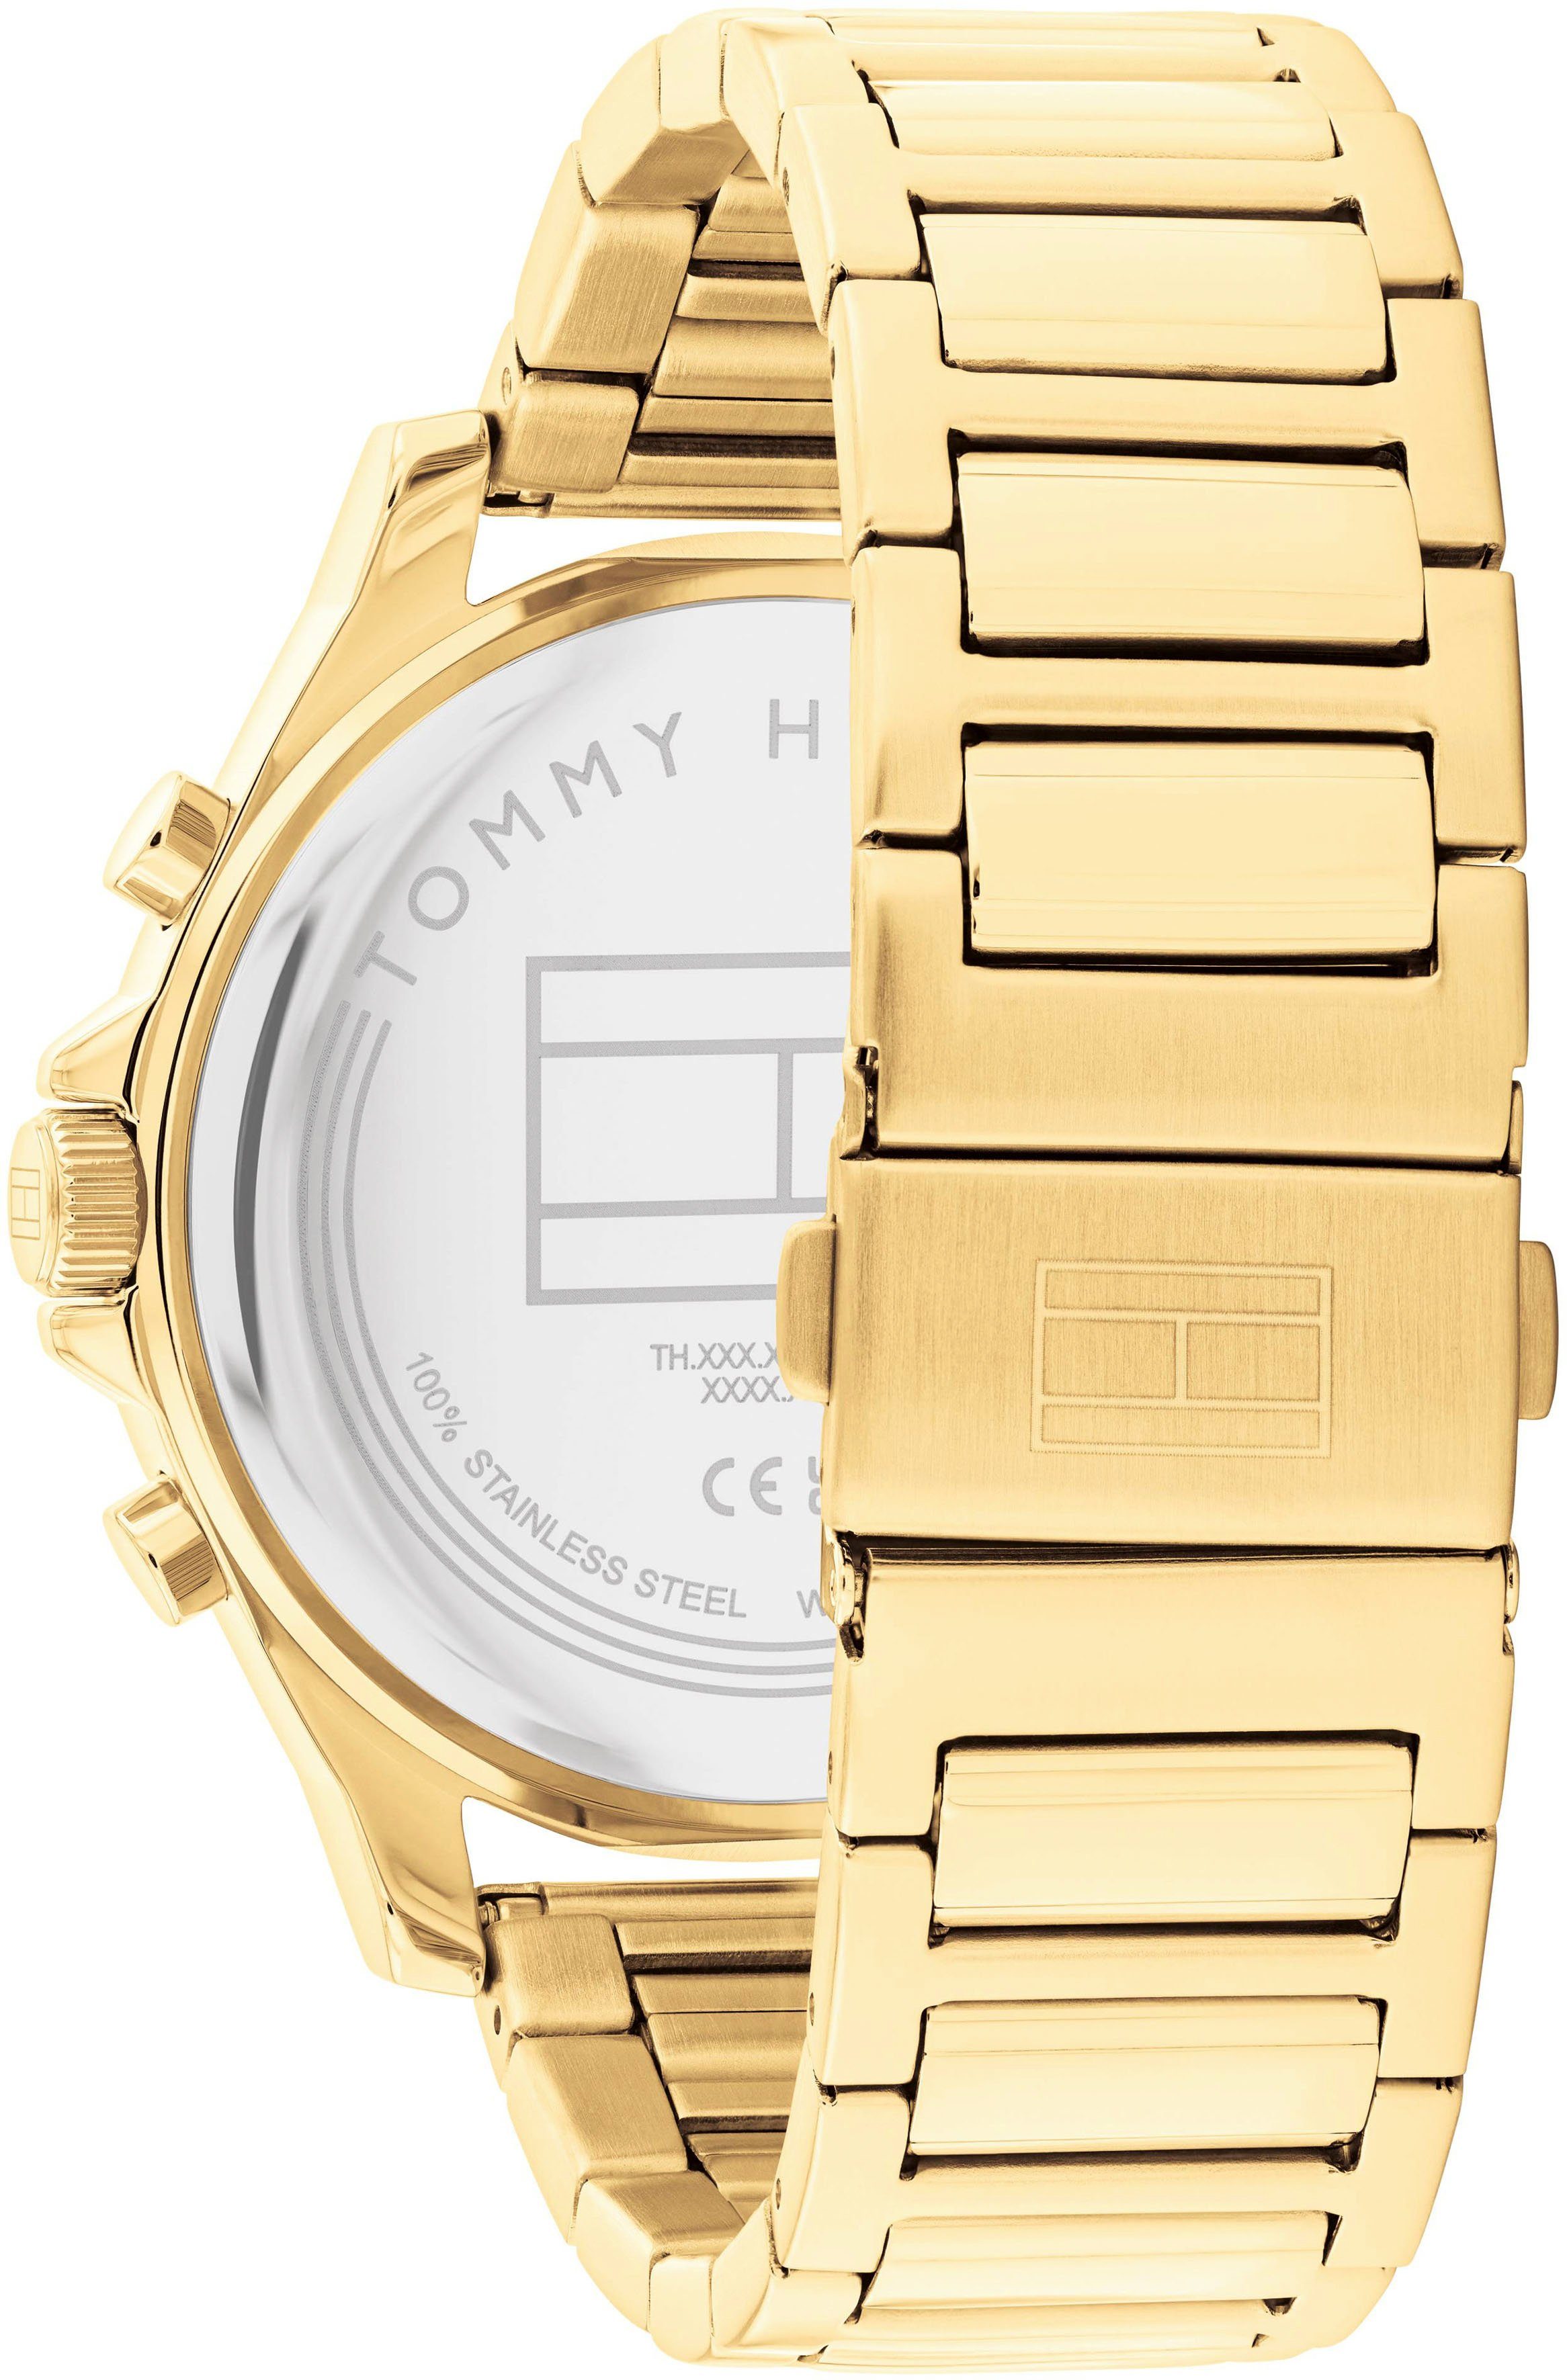 CONTEMPORARY, Hilfiger 1710520 Tommy Multifunktionsuhr